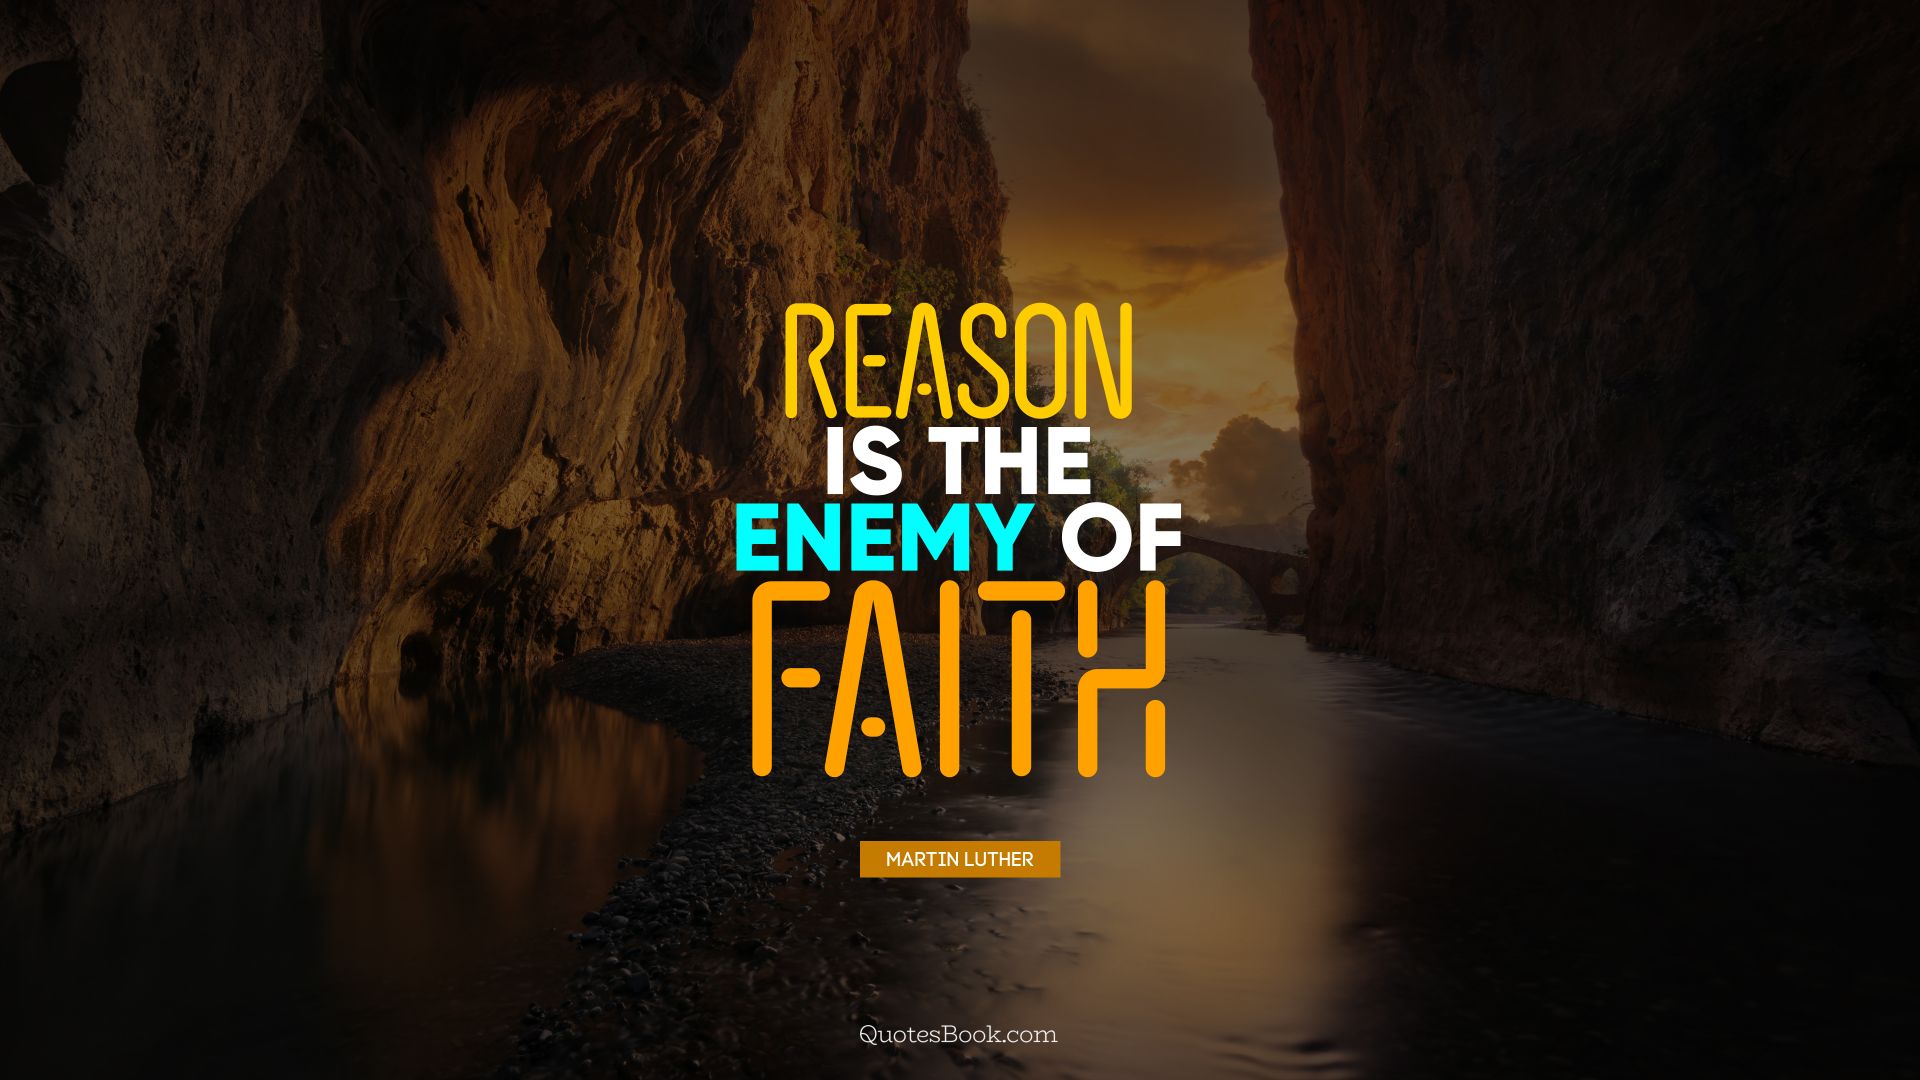 Reason is the enemy of faith. - Quote by Martin Luther